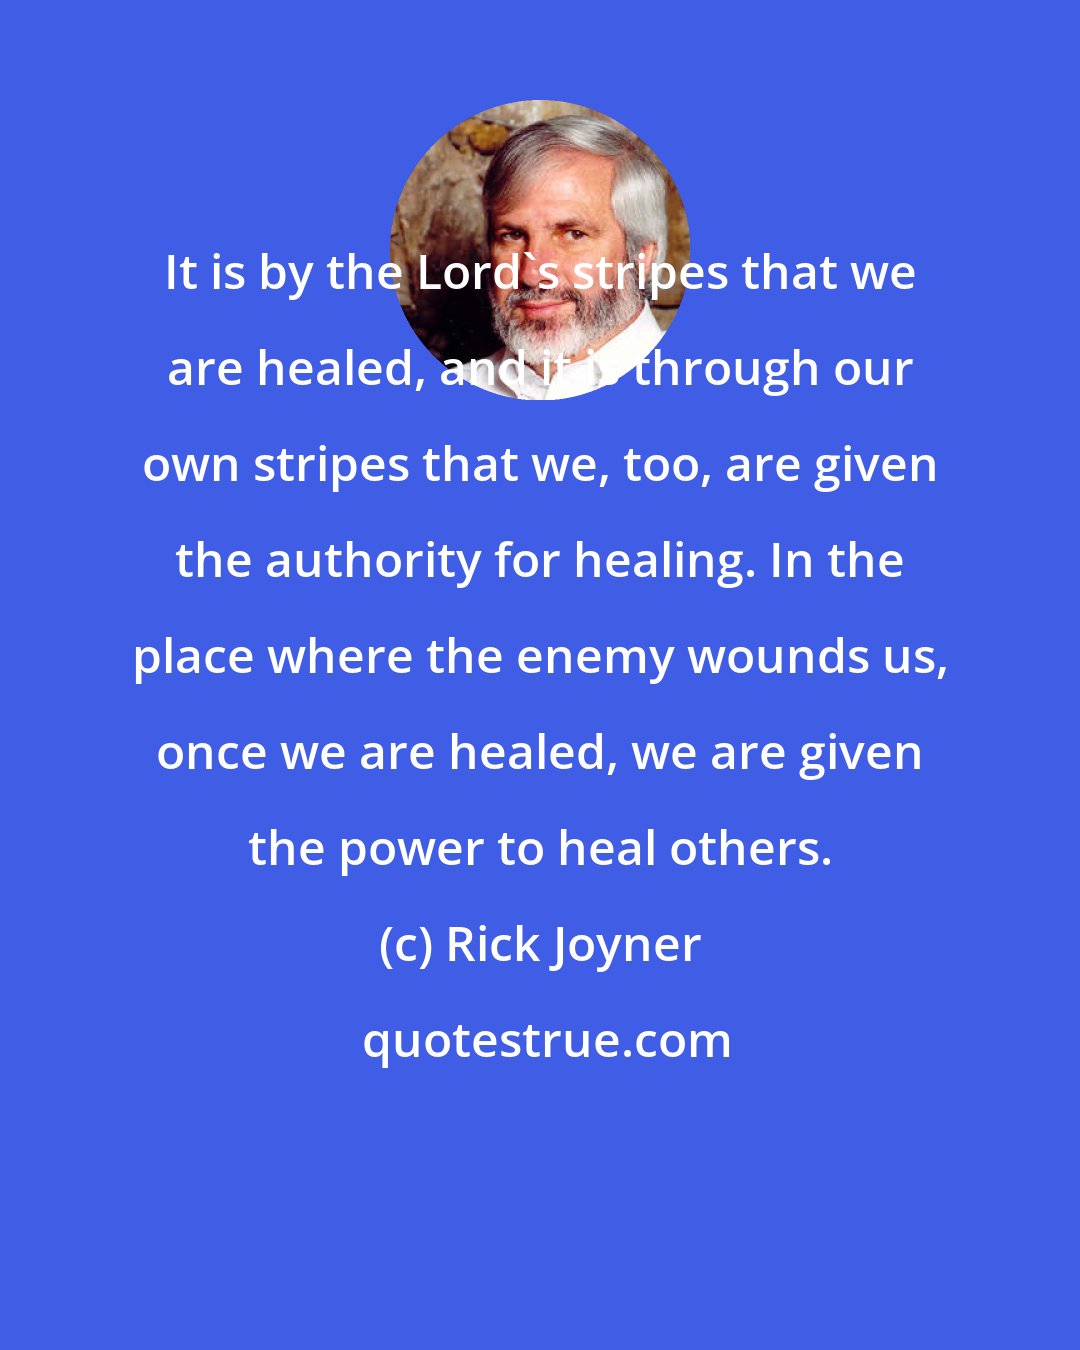 Rick Joyner: It is by the Lord's stripes that we are healed, and it is through our own stripes that we, too, are given the authority for healing. In the place where the enemy wounds us, once we are healed, we are given the power to heal others.